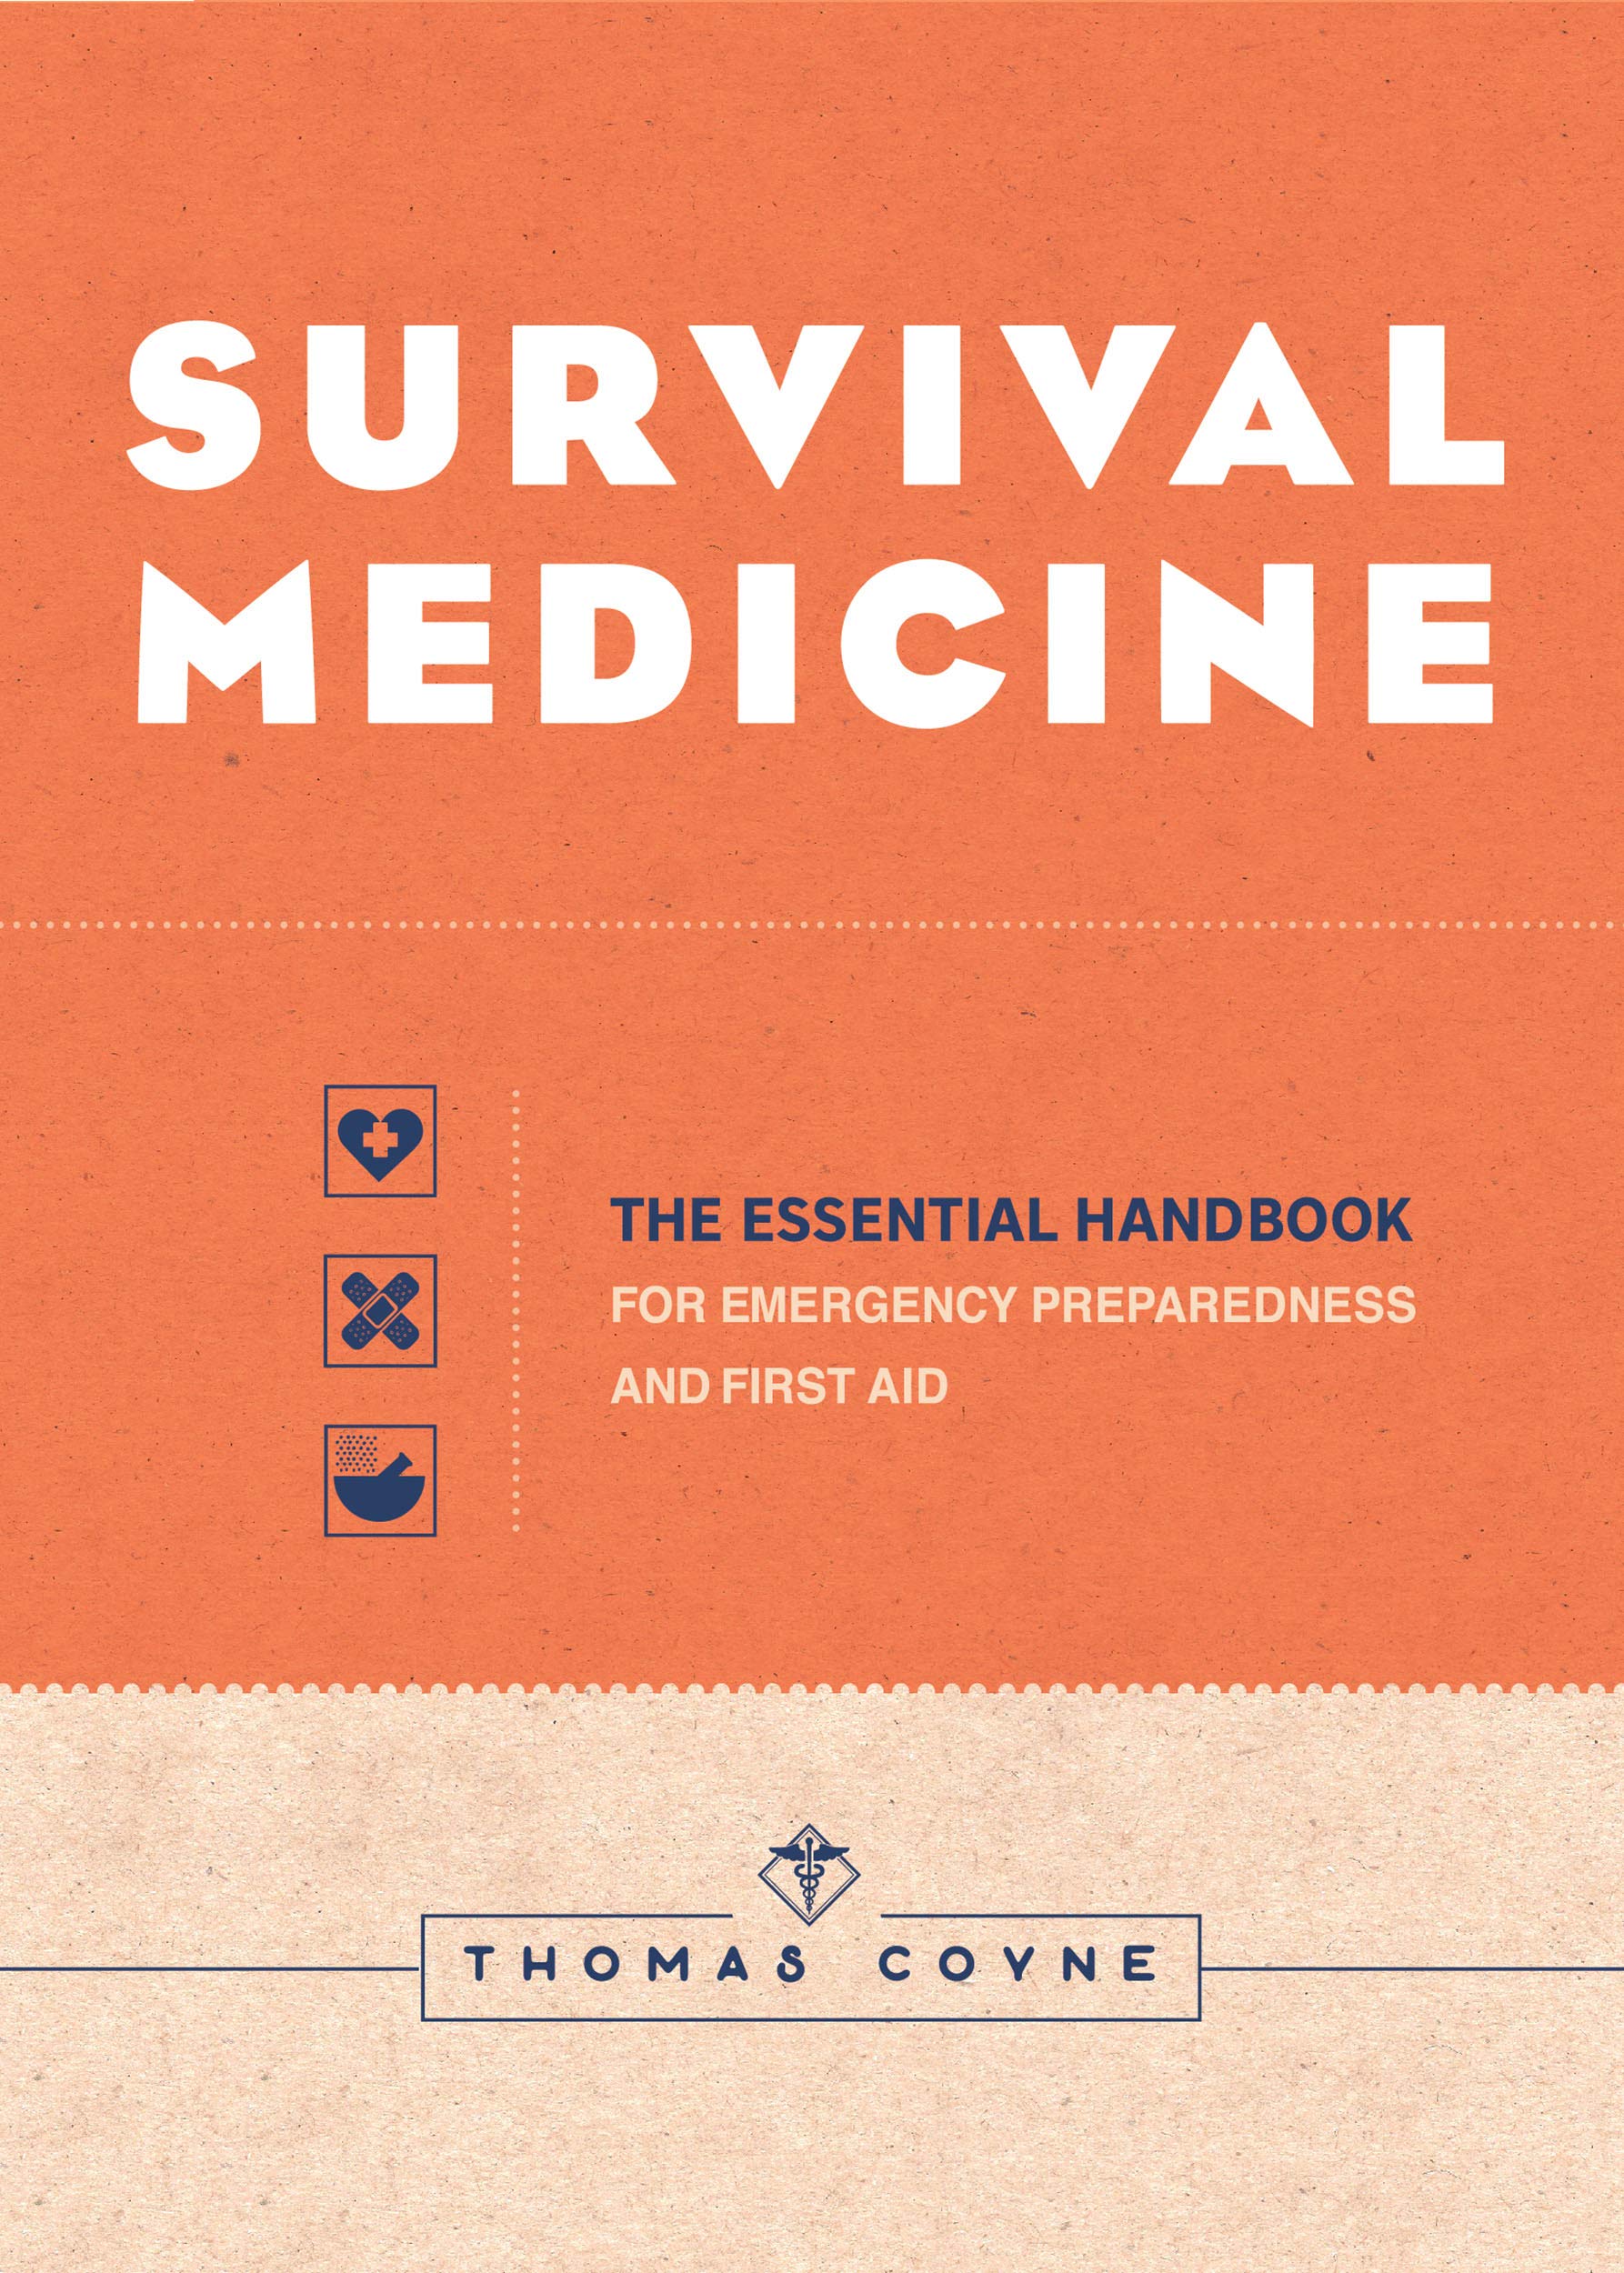 Survival Medicine: The Essential Handbook for Emergency Preparedness and First Aid